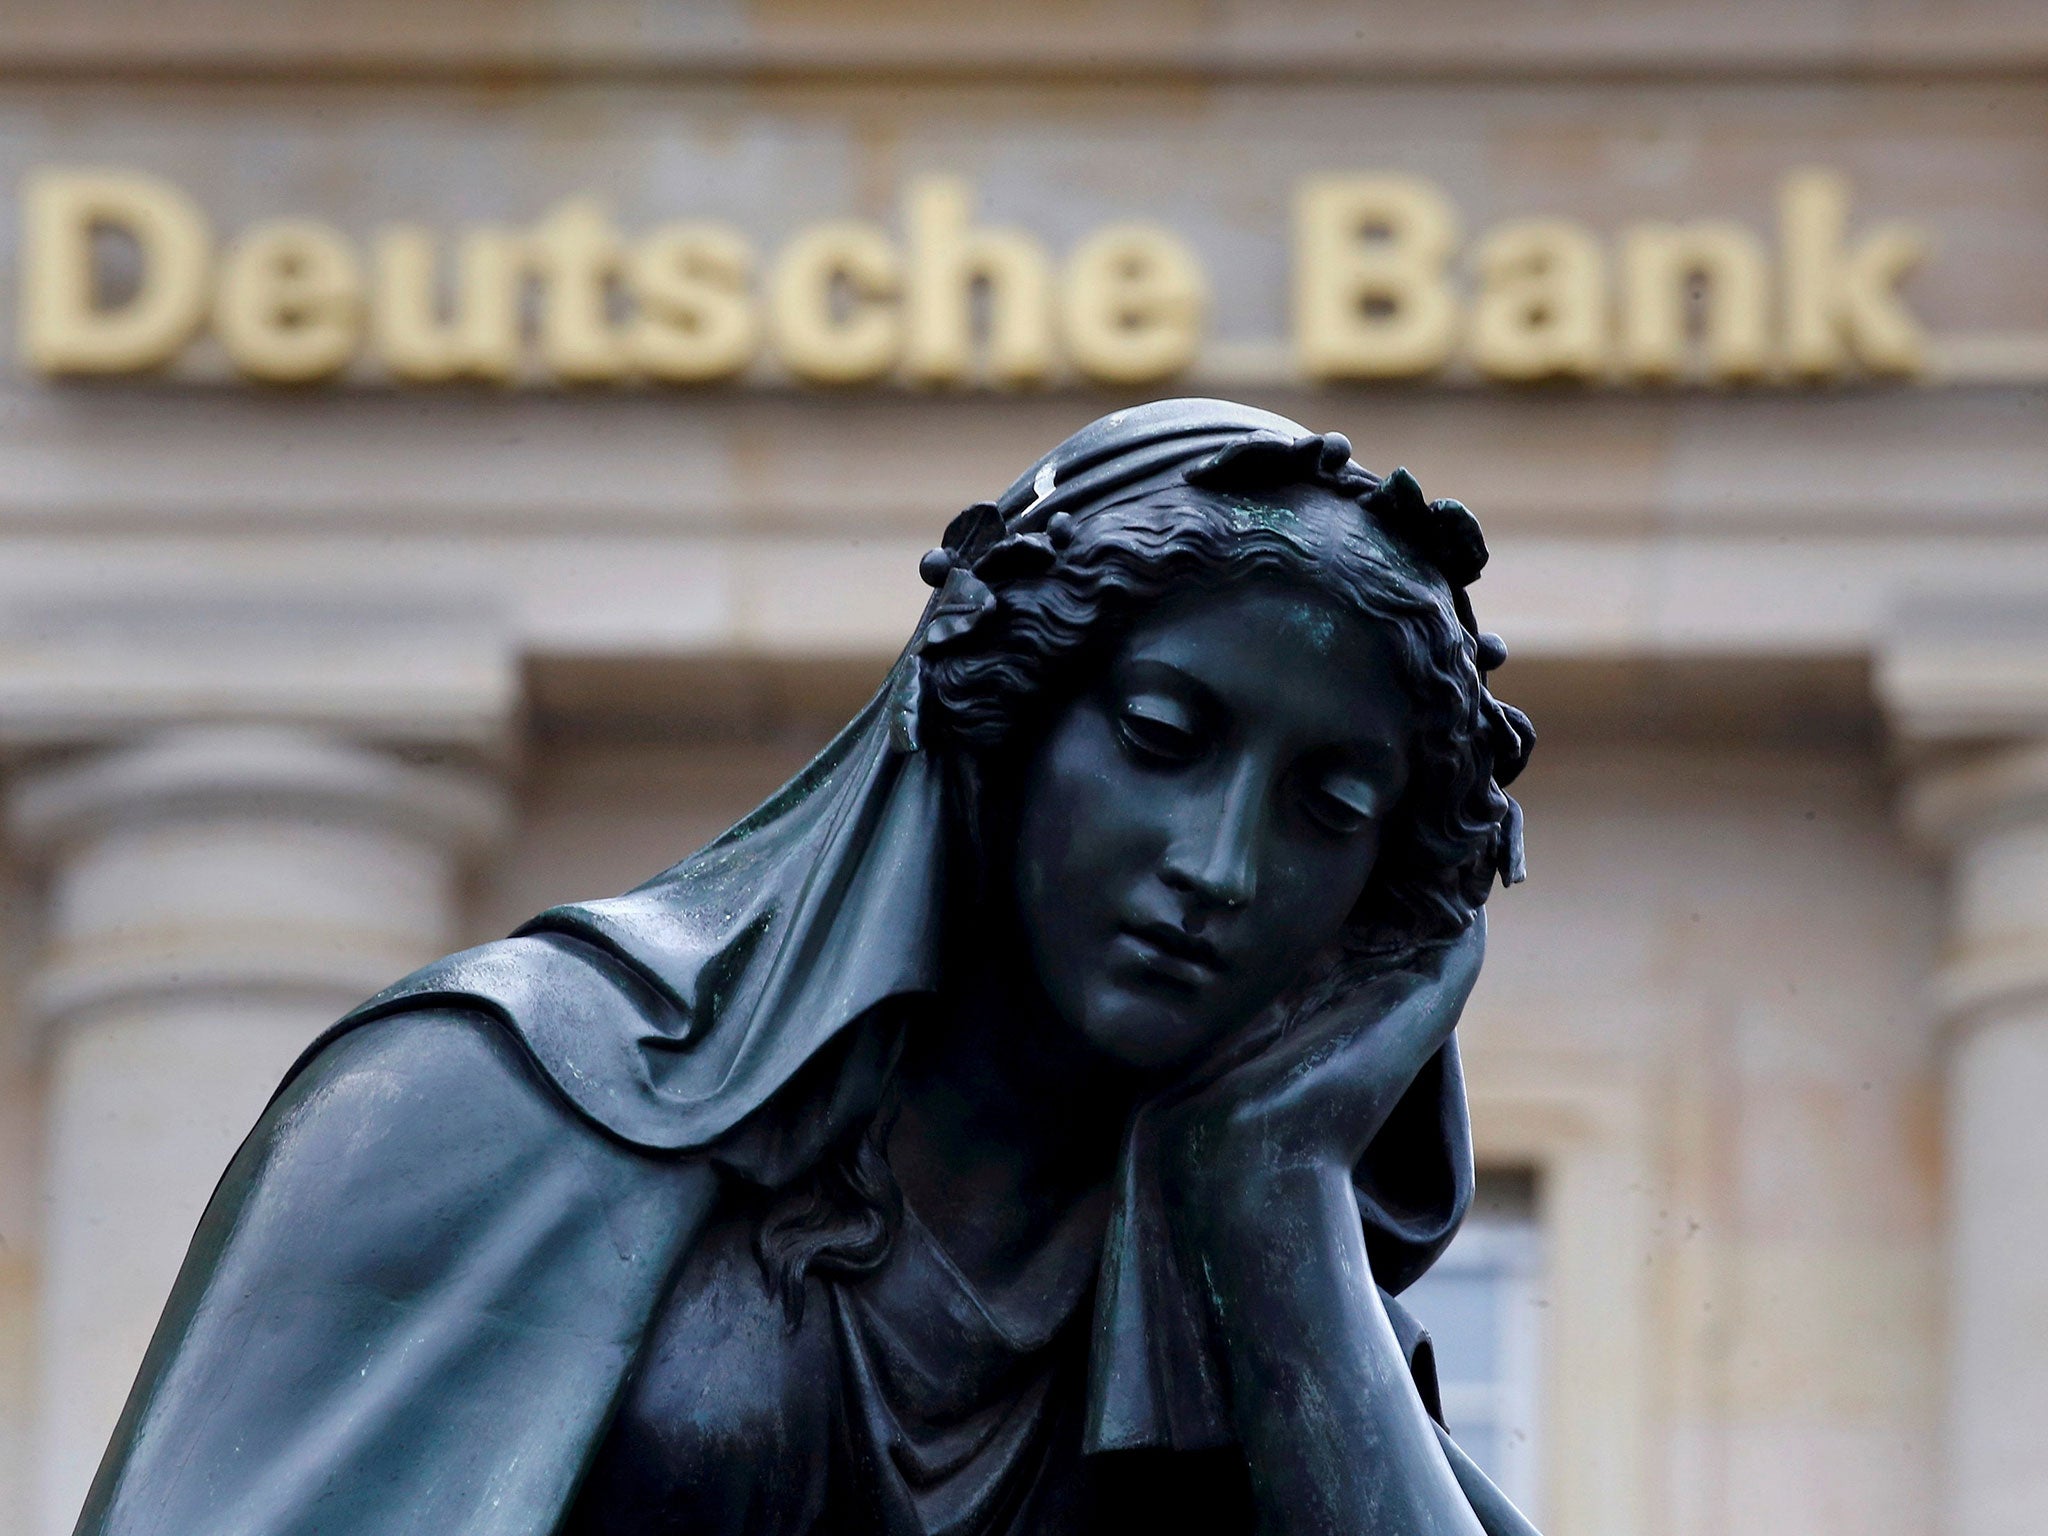 Deutsche Bank’s shares have rebounded 84 per cent from their low in September